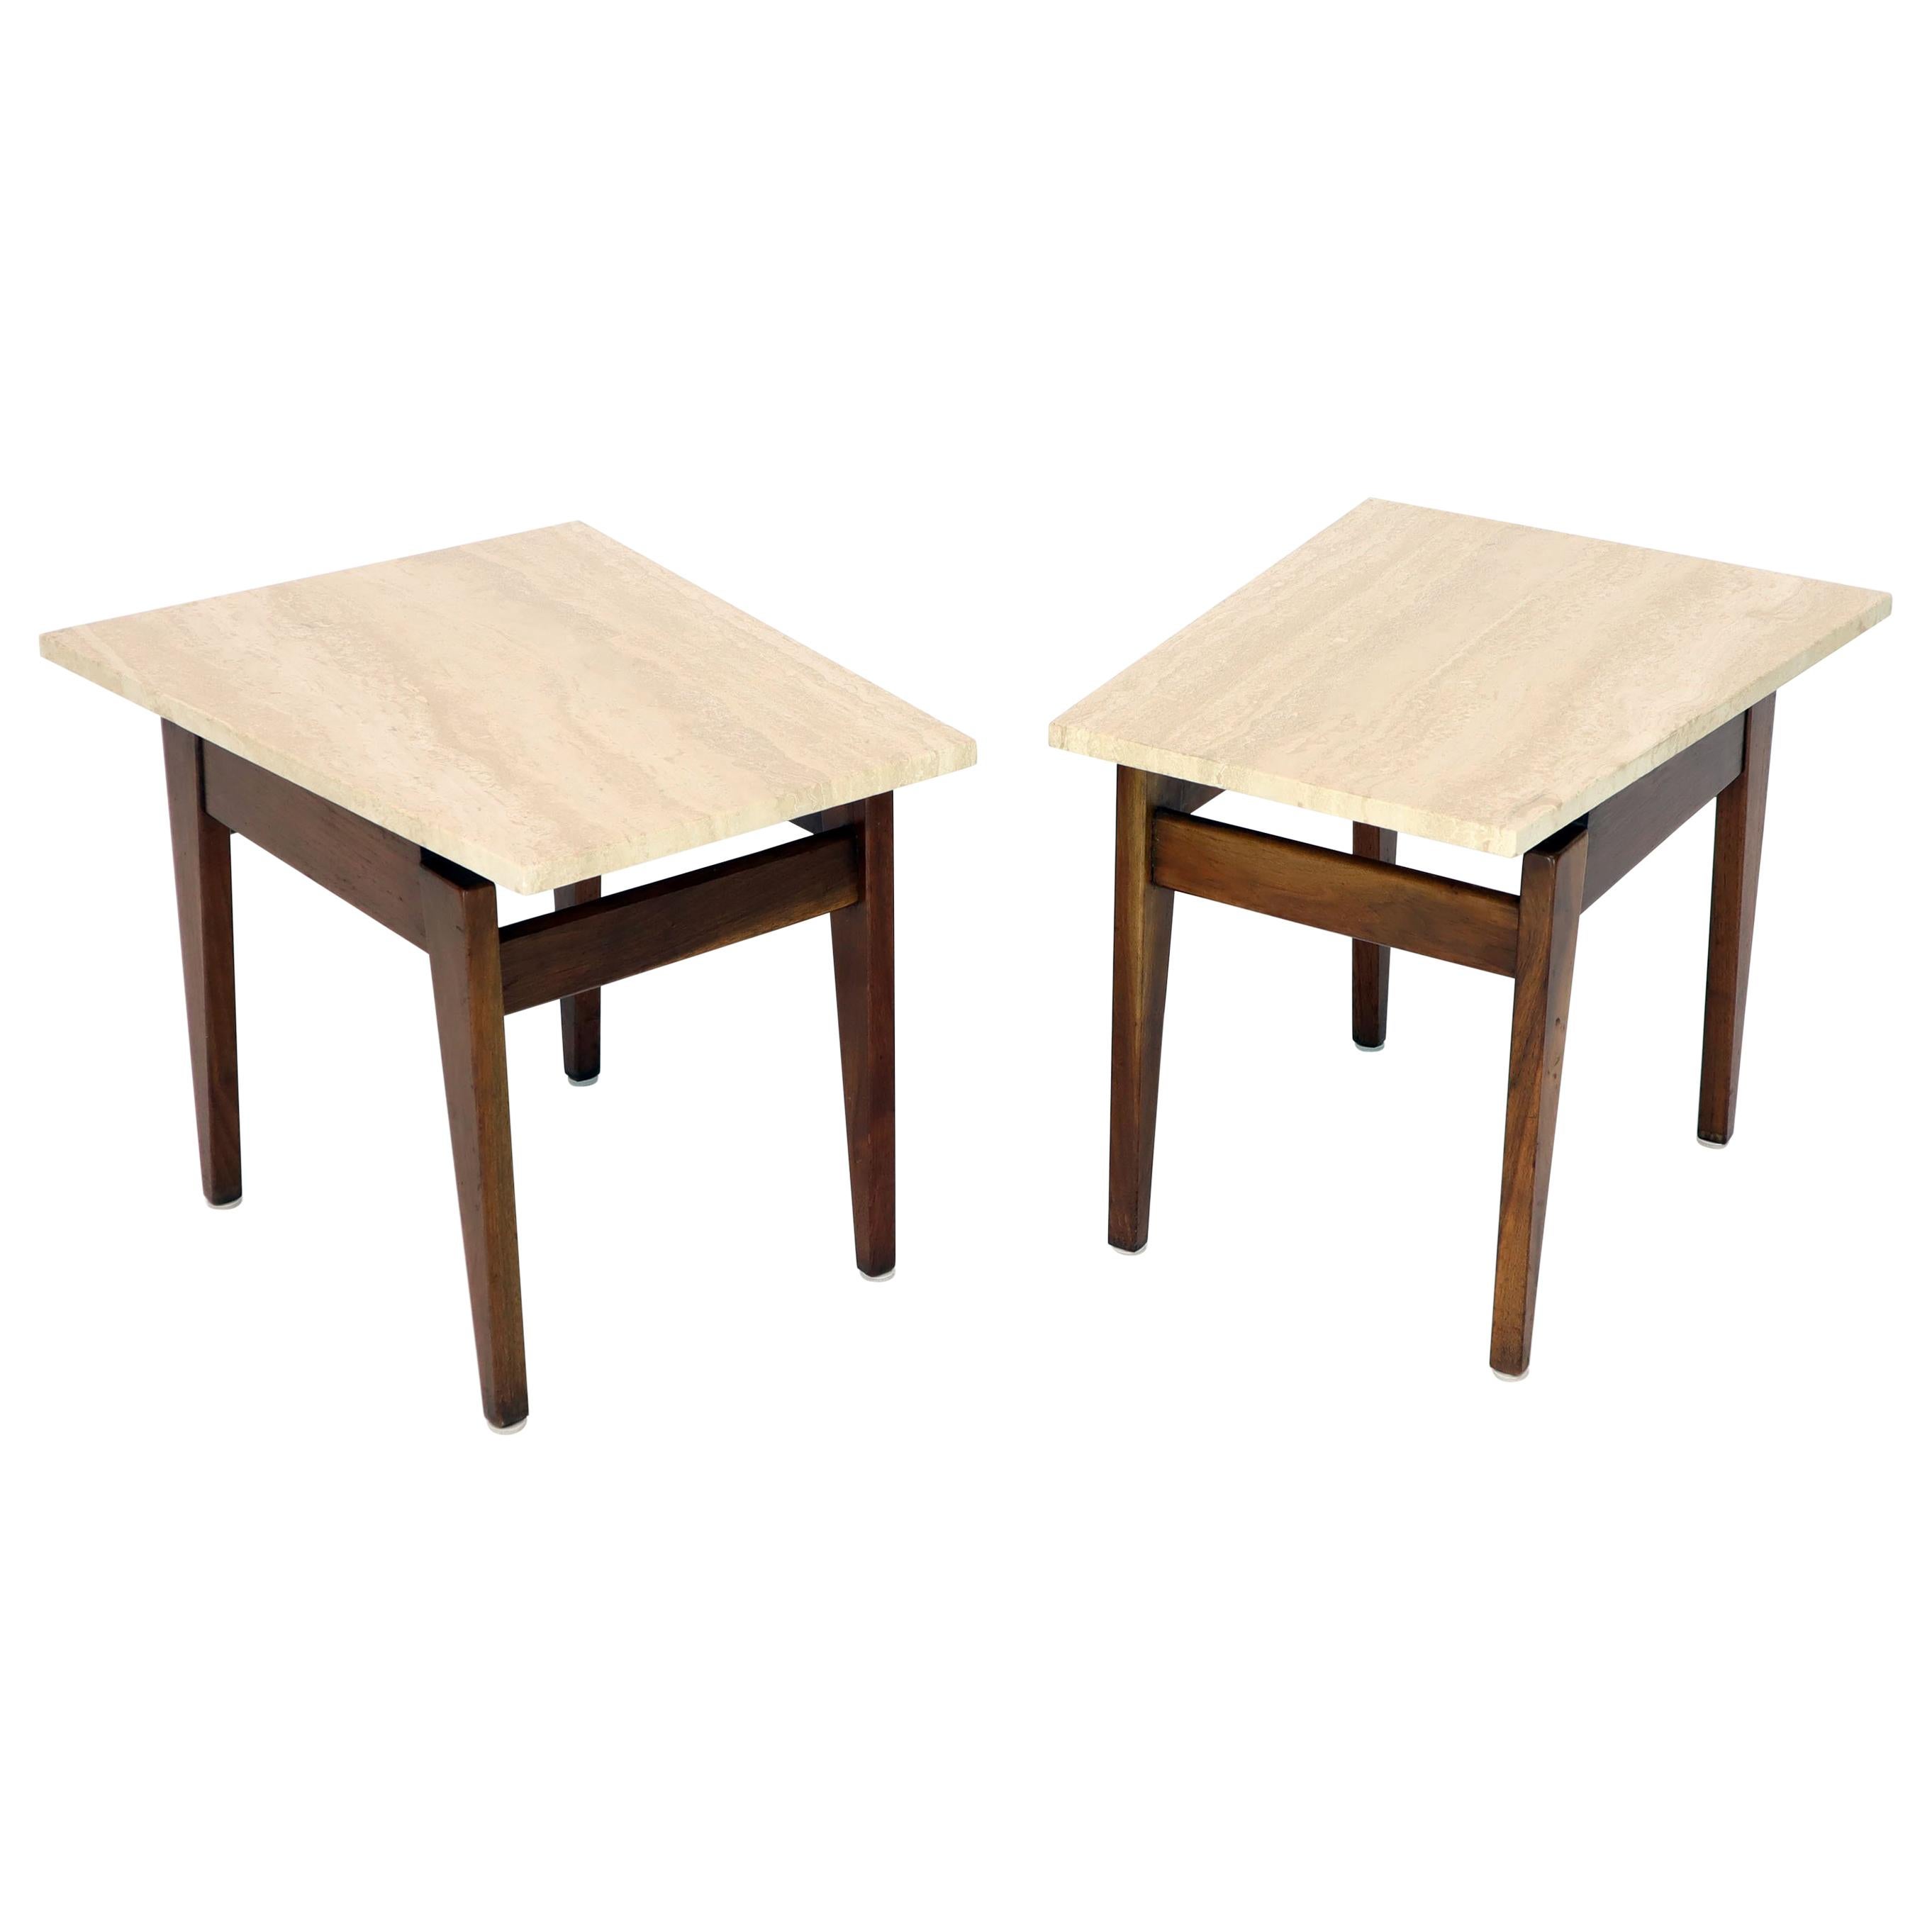 Pair of Risom Walnut End Tables W/ Wedge Shape Travertine Marble Tops 